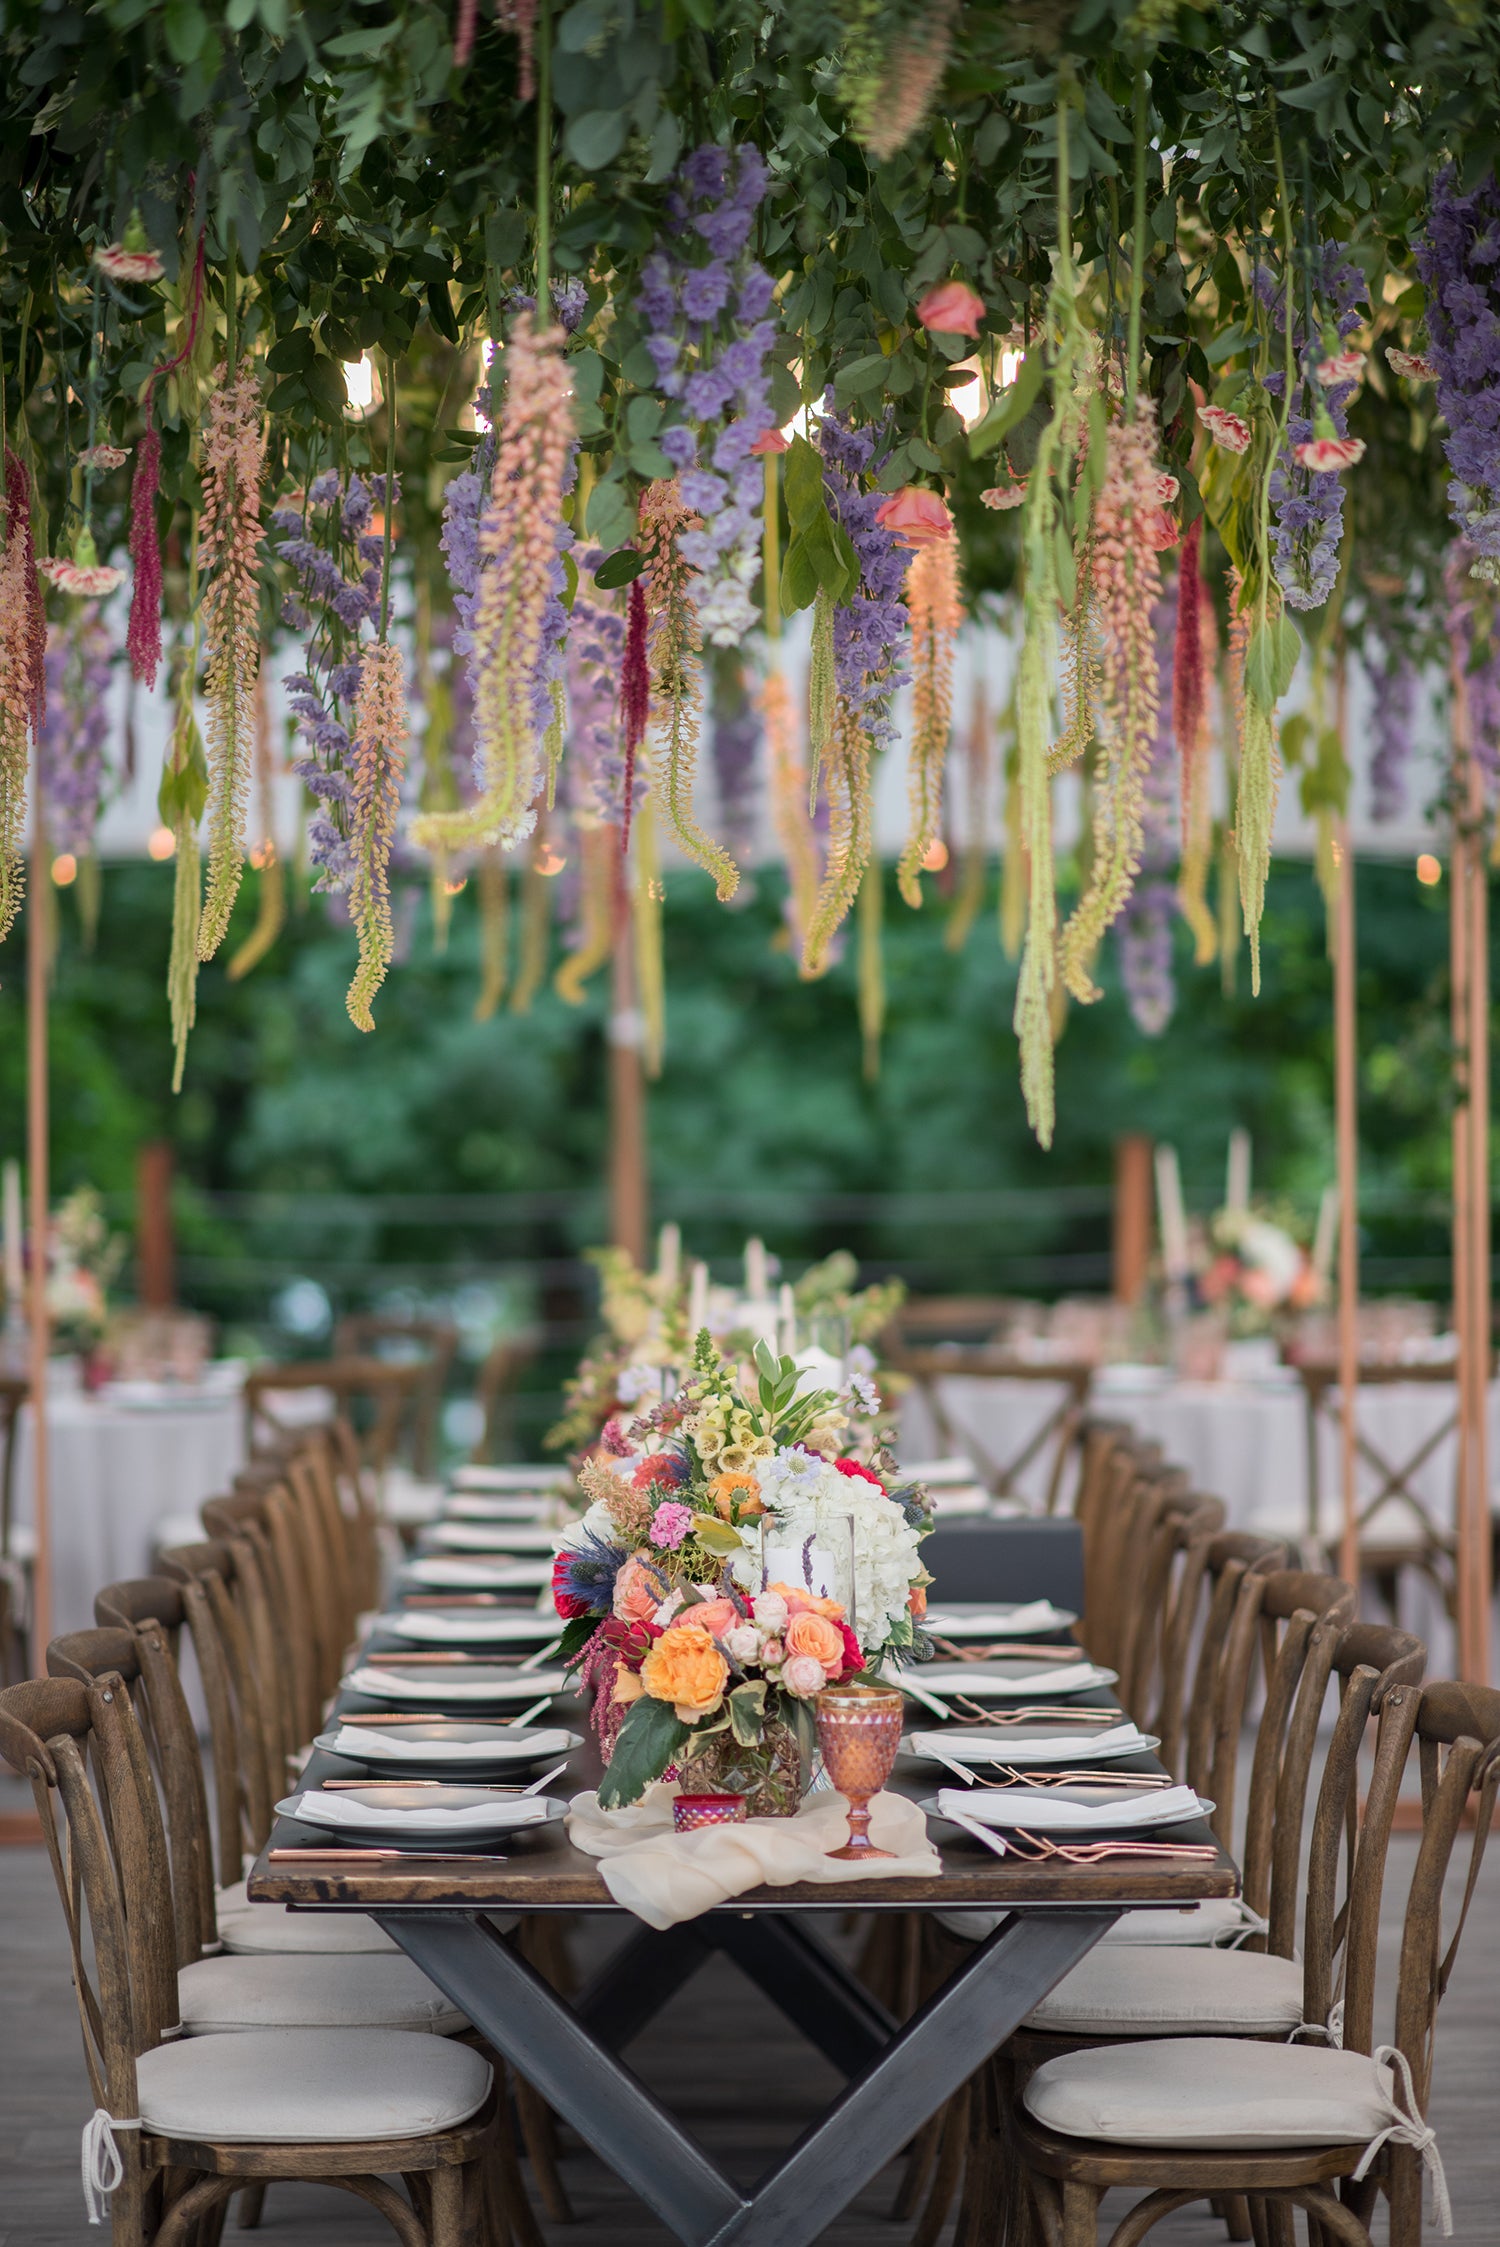 Whimsical tented wedding Pittsford new York with hanging flowers